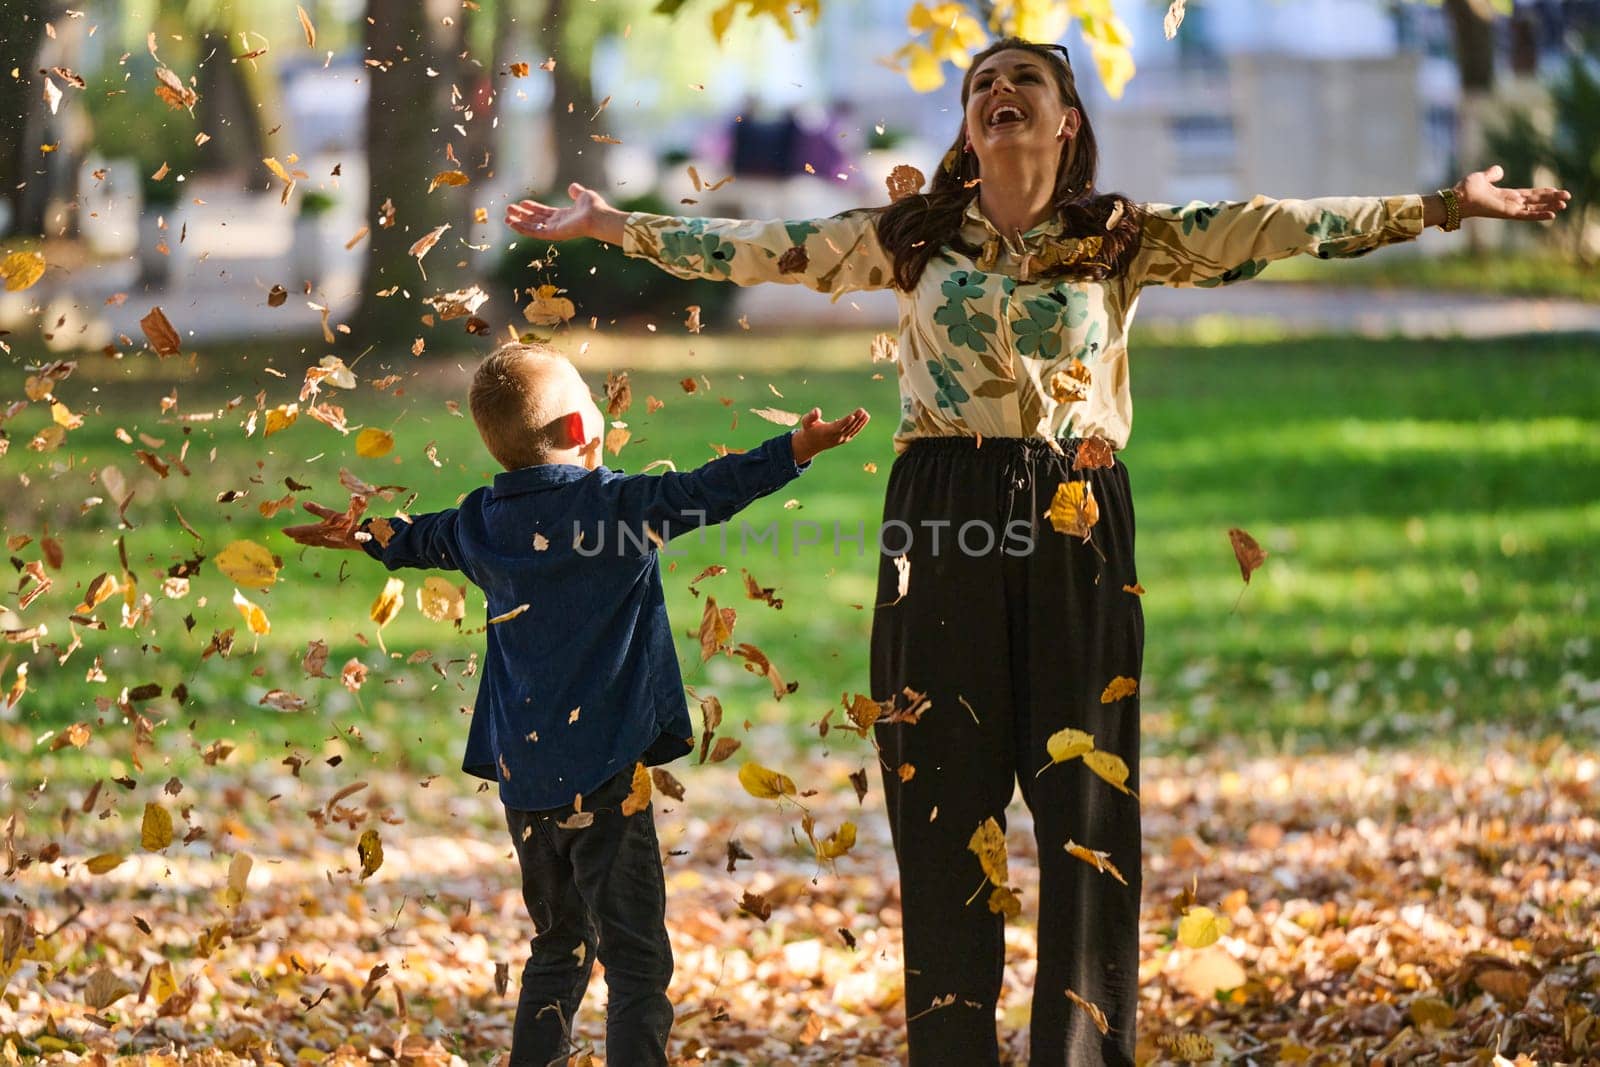 A modern woman joyfully plays with her son in the park, tossing leaves on a beautiful autumn day, capturing the essence of family life and the warmth of mother-son bonding in the midst of the fall season.